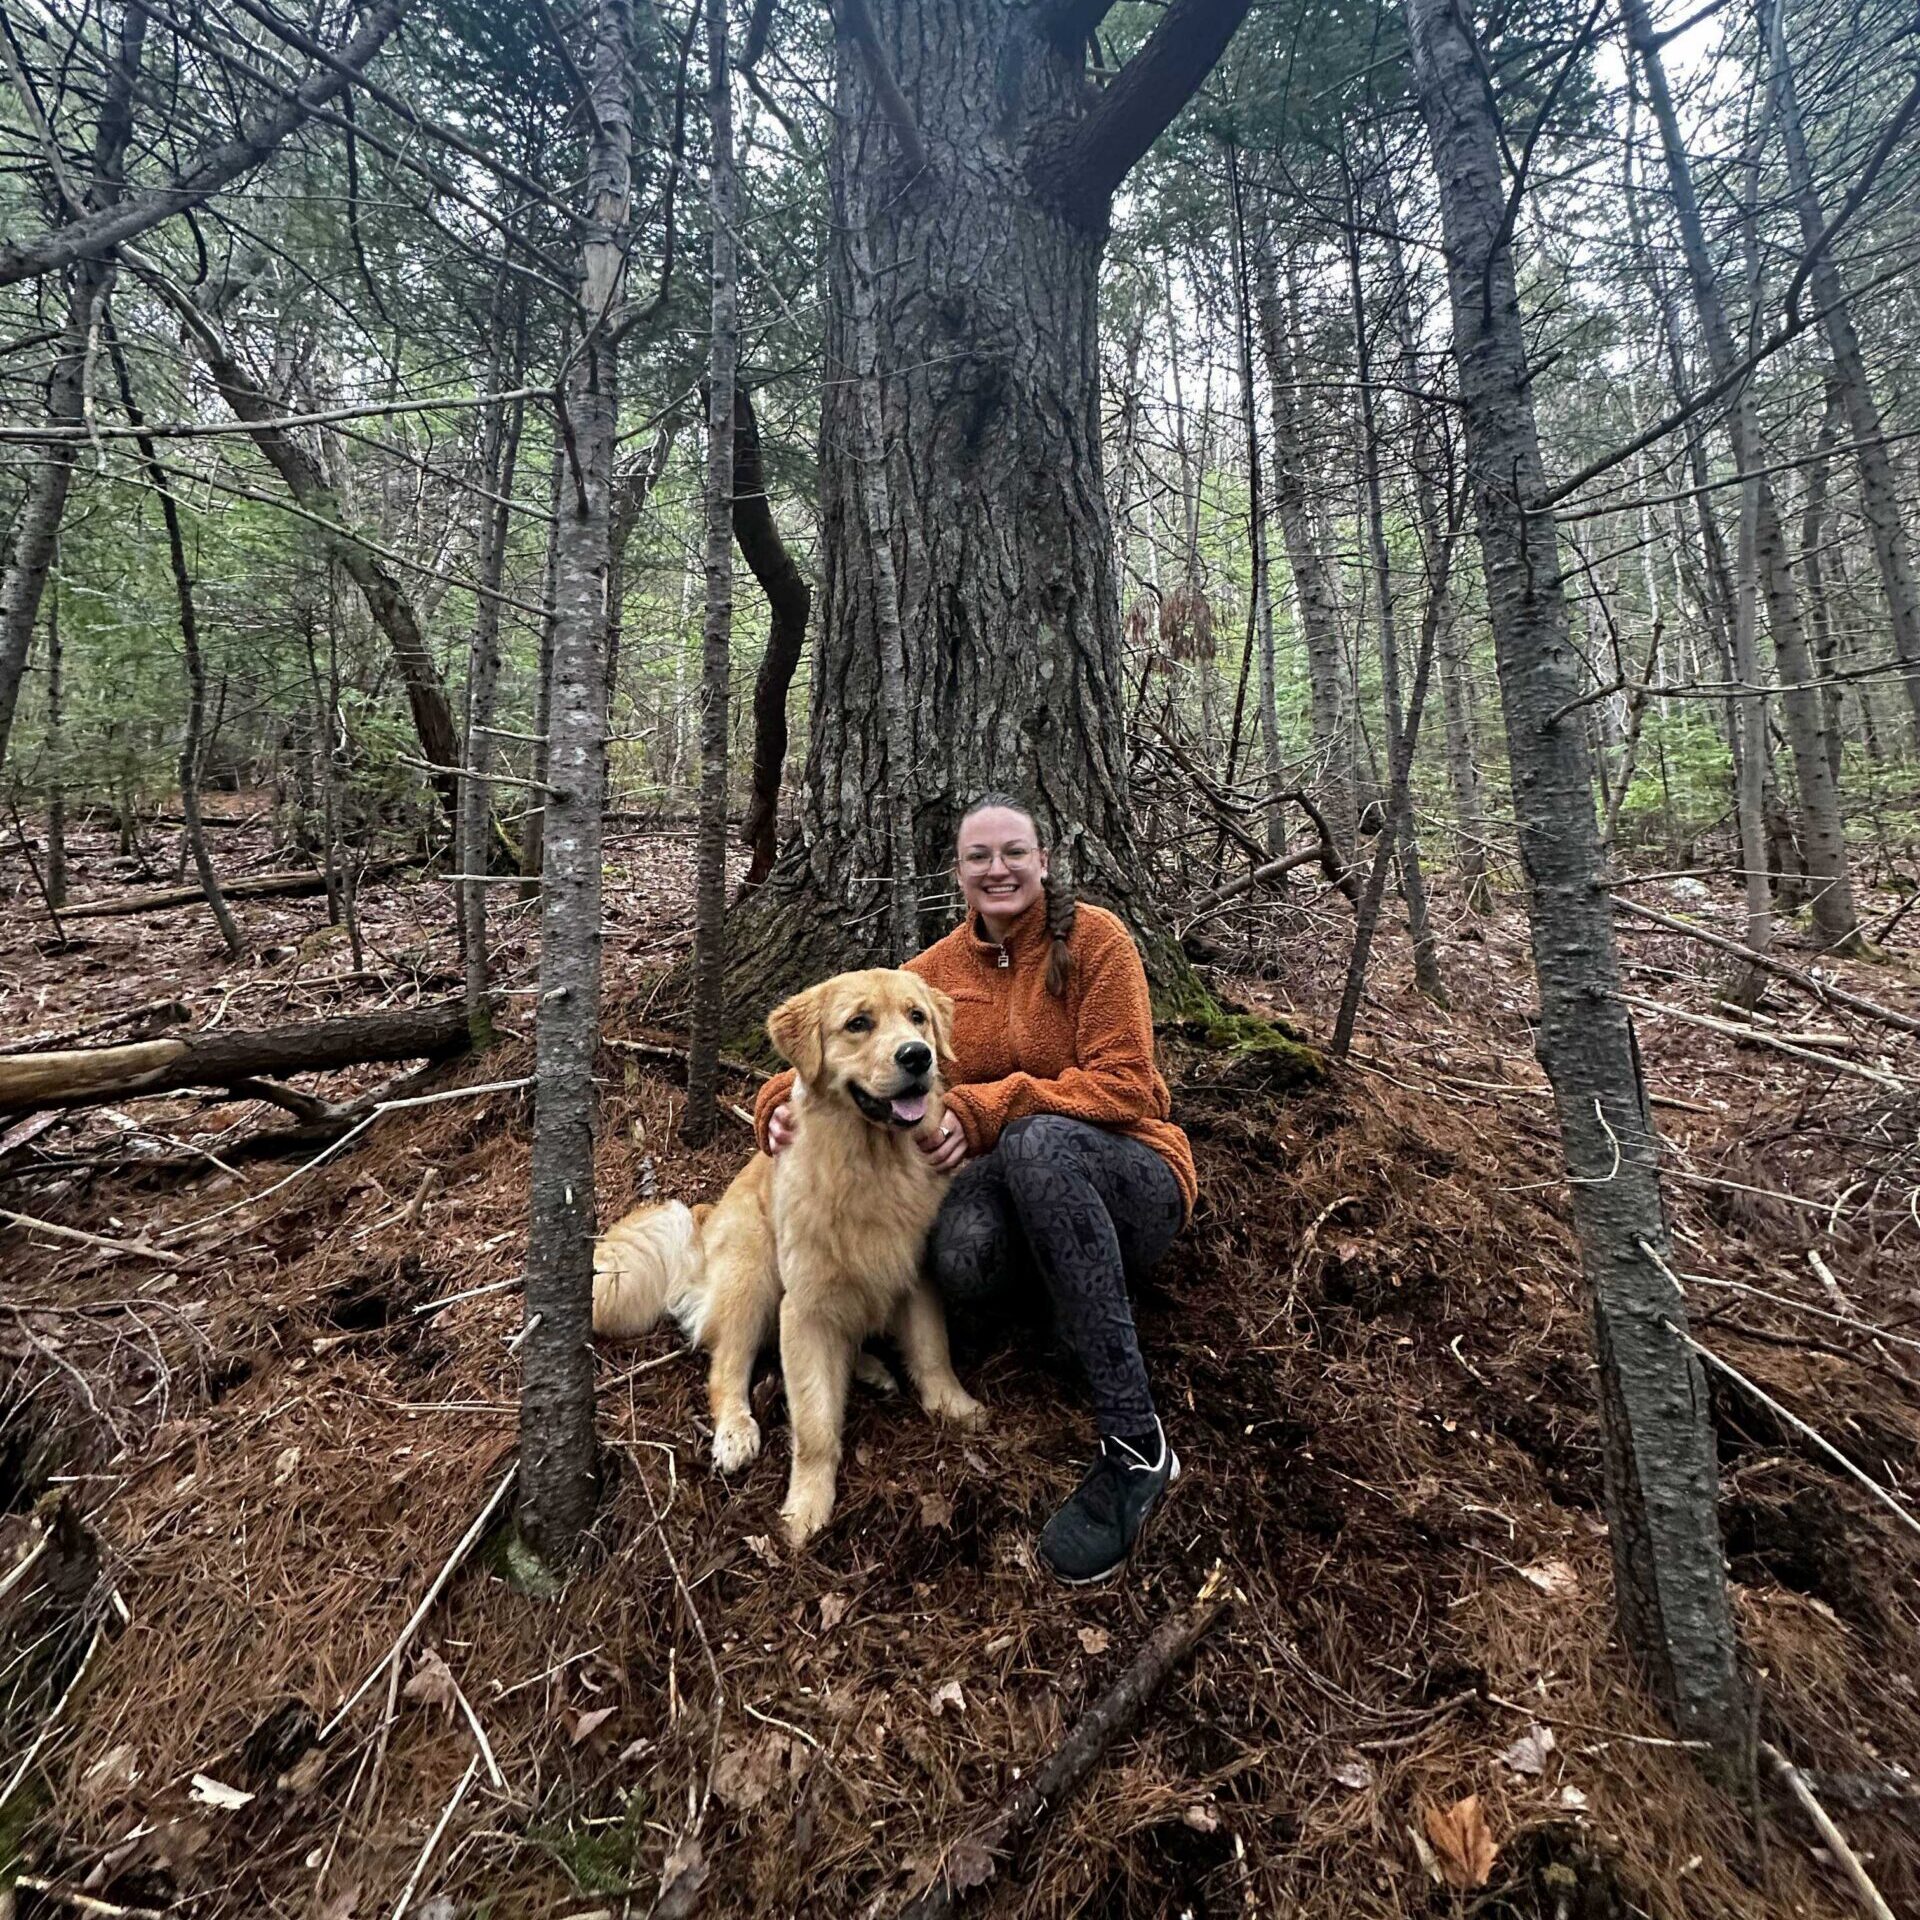 Sabrina is sitting next to her Golden Retriever puppy, at the base of an old Balsam Fir tree. They're in a densely wooded area.